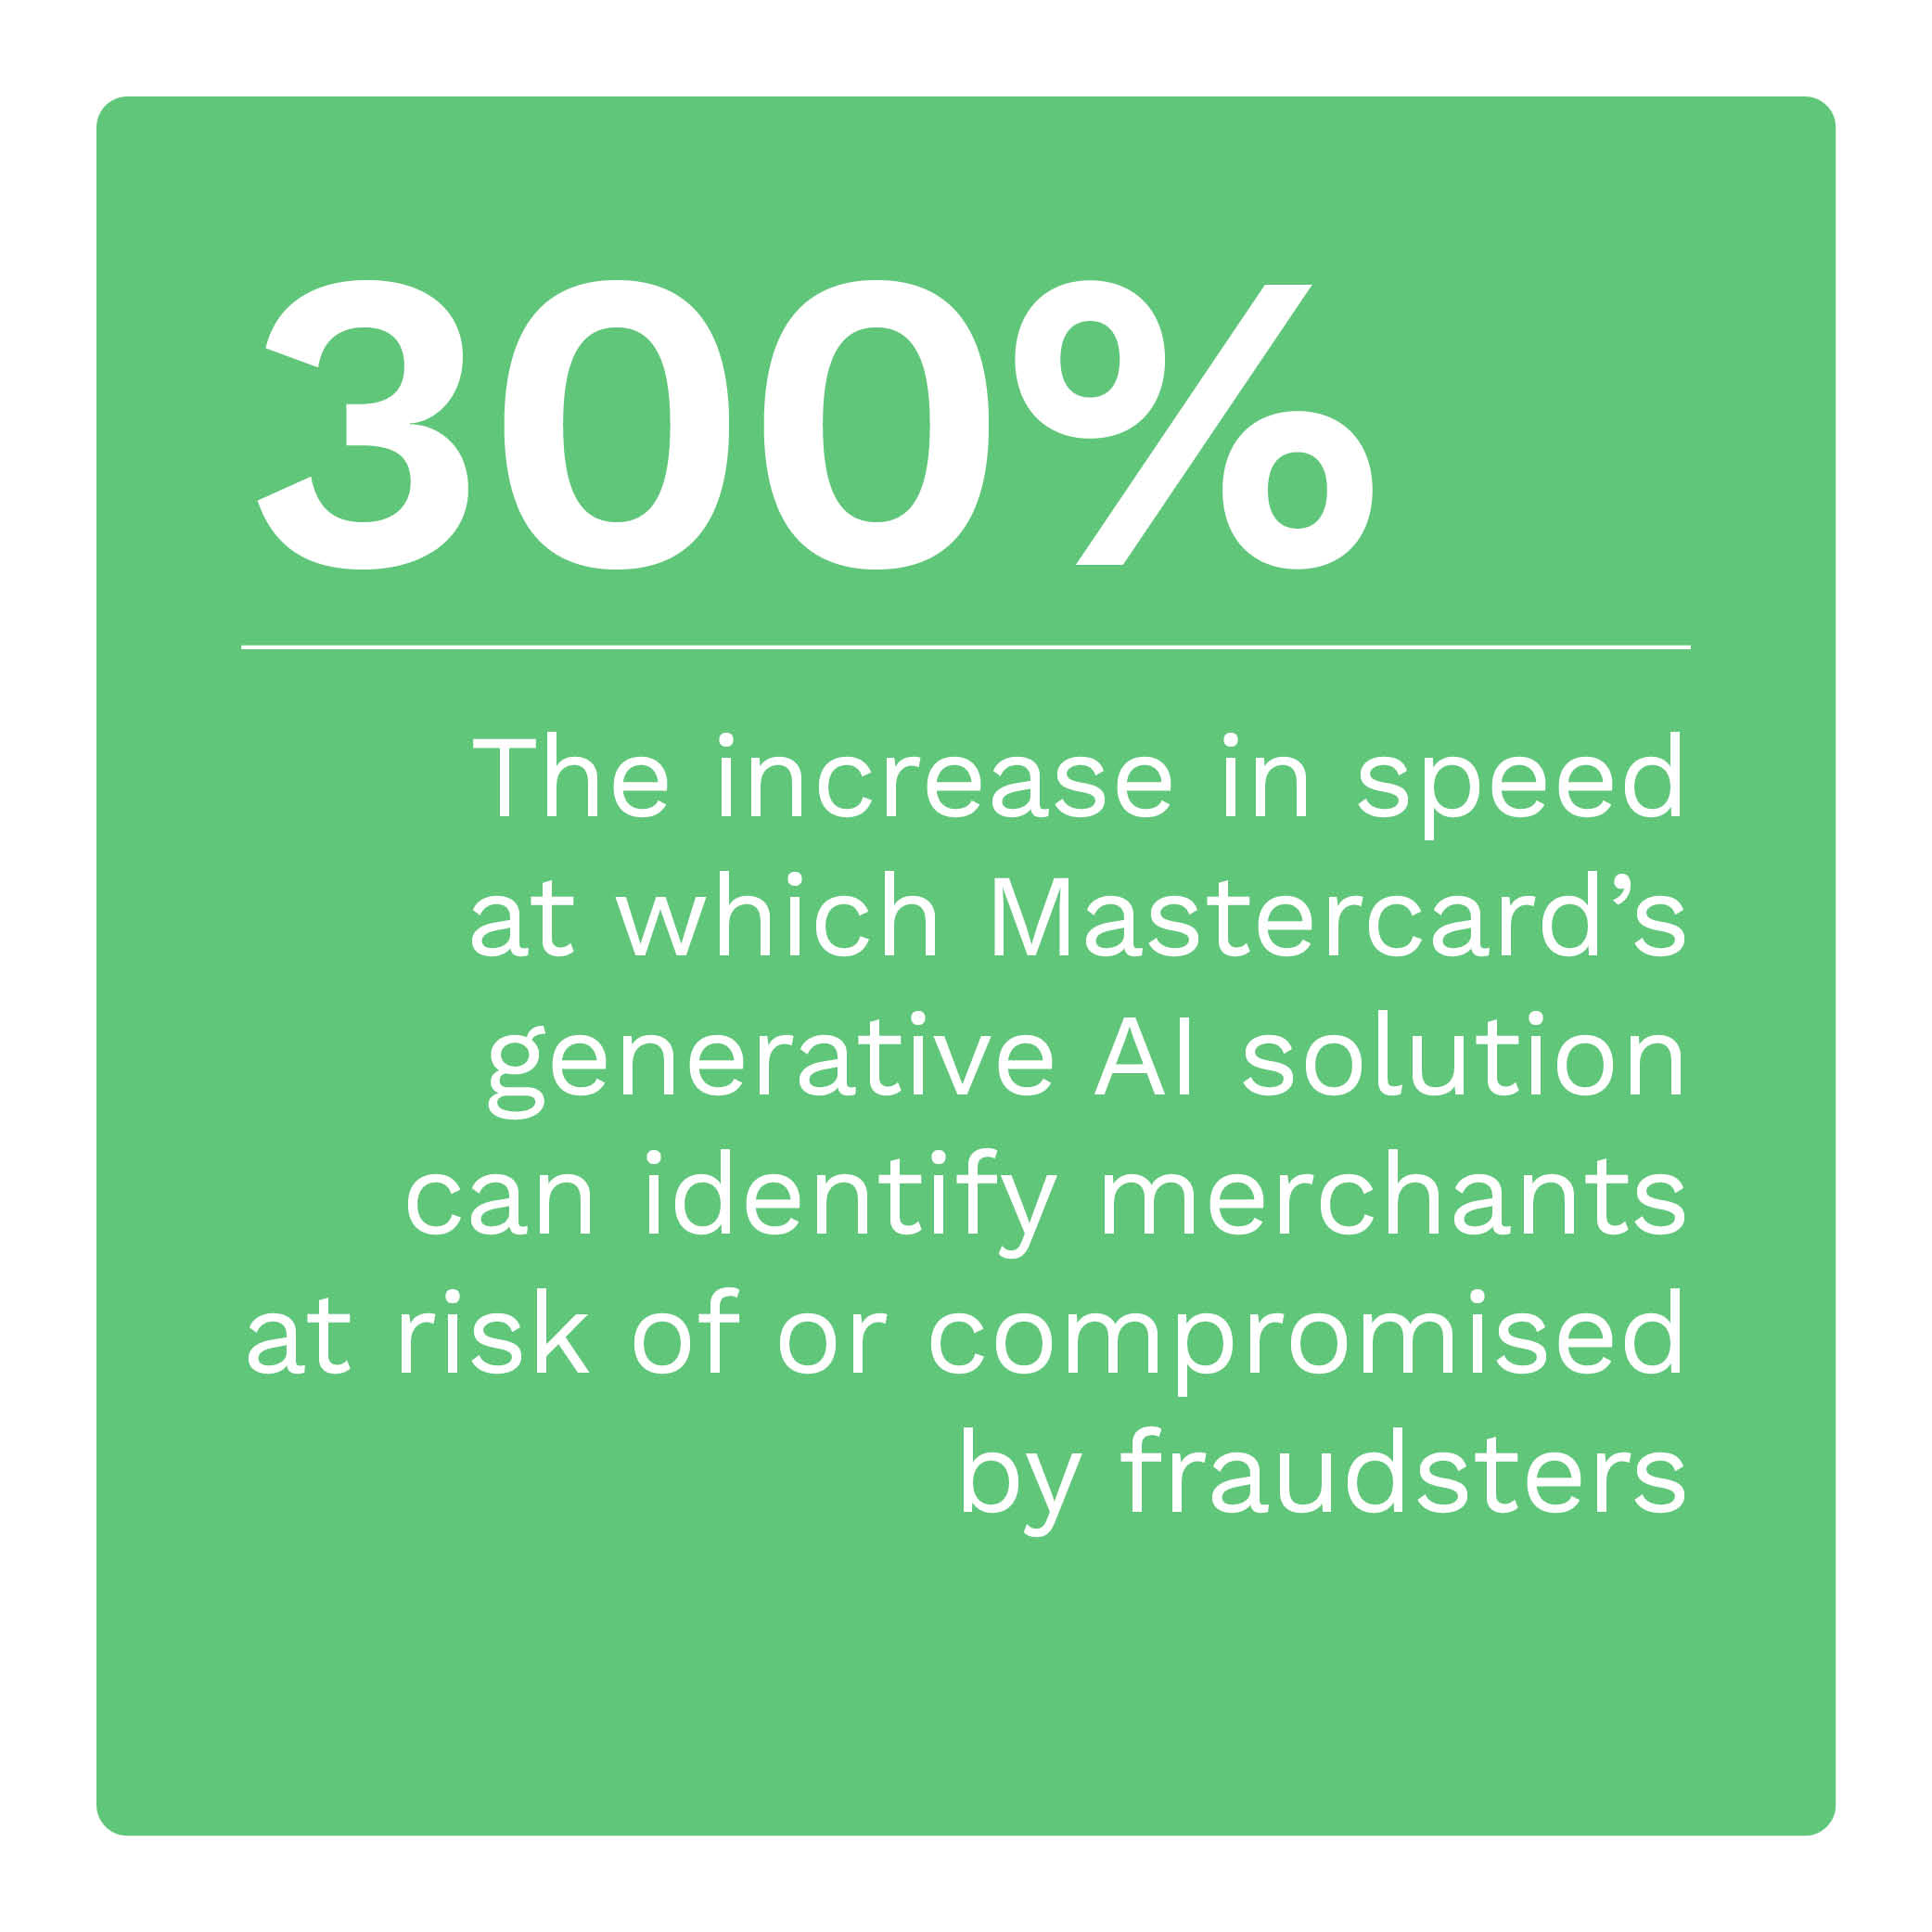 300%: The increase in speed at which Mastercard’s generative AI solution can identify merchants at risk of or compromised by fraudsters